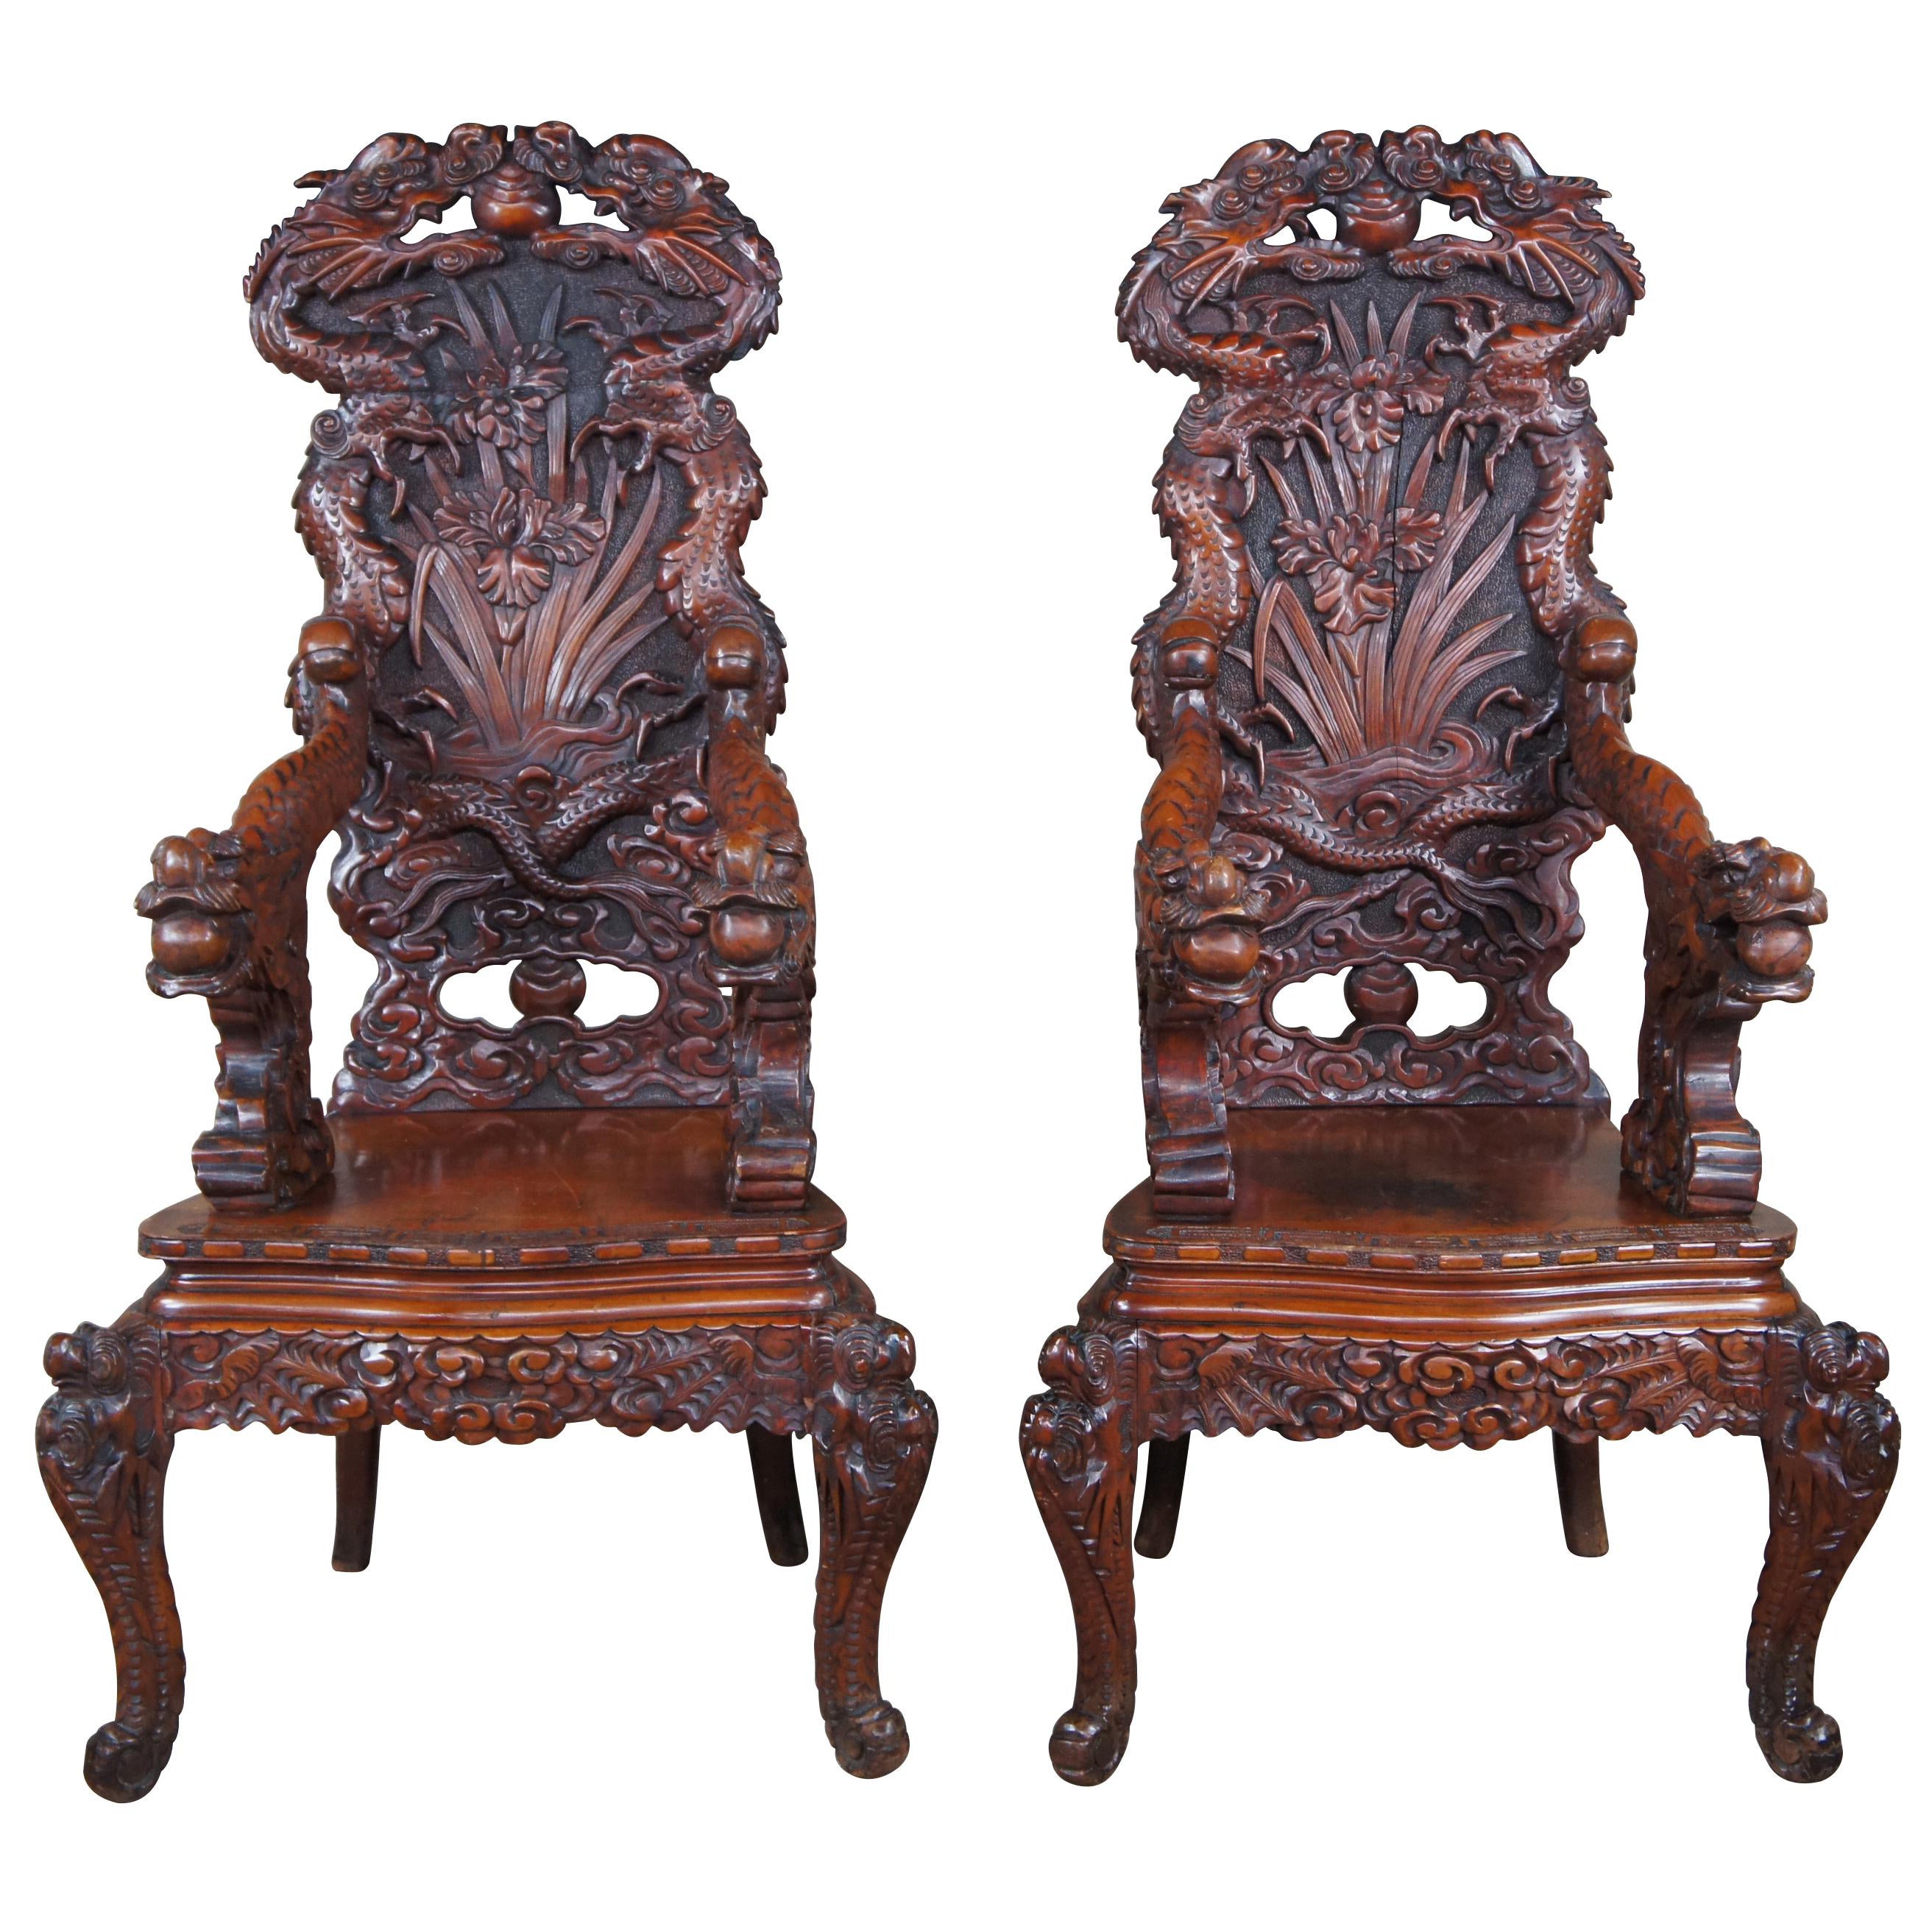 2 Antique Japanese Imperial Meiji Elm High Relief Carved Dragon Throne Armchair For Sale